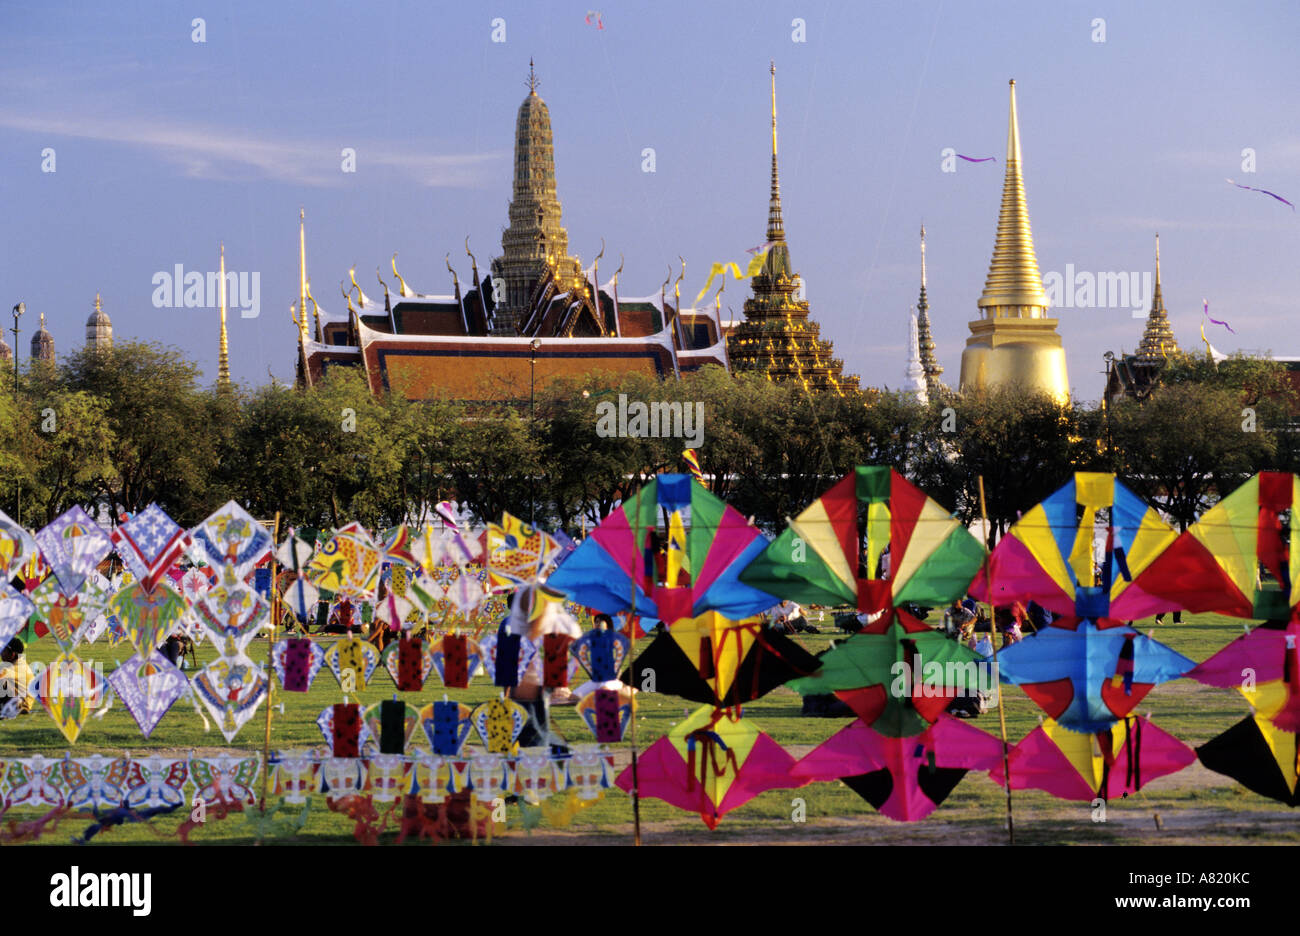 Thailand, Bangkok, April kite festival on Sanam Luang Square, with Wat Phra Kaew Temple in the background Stock Photo